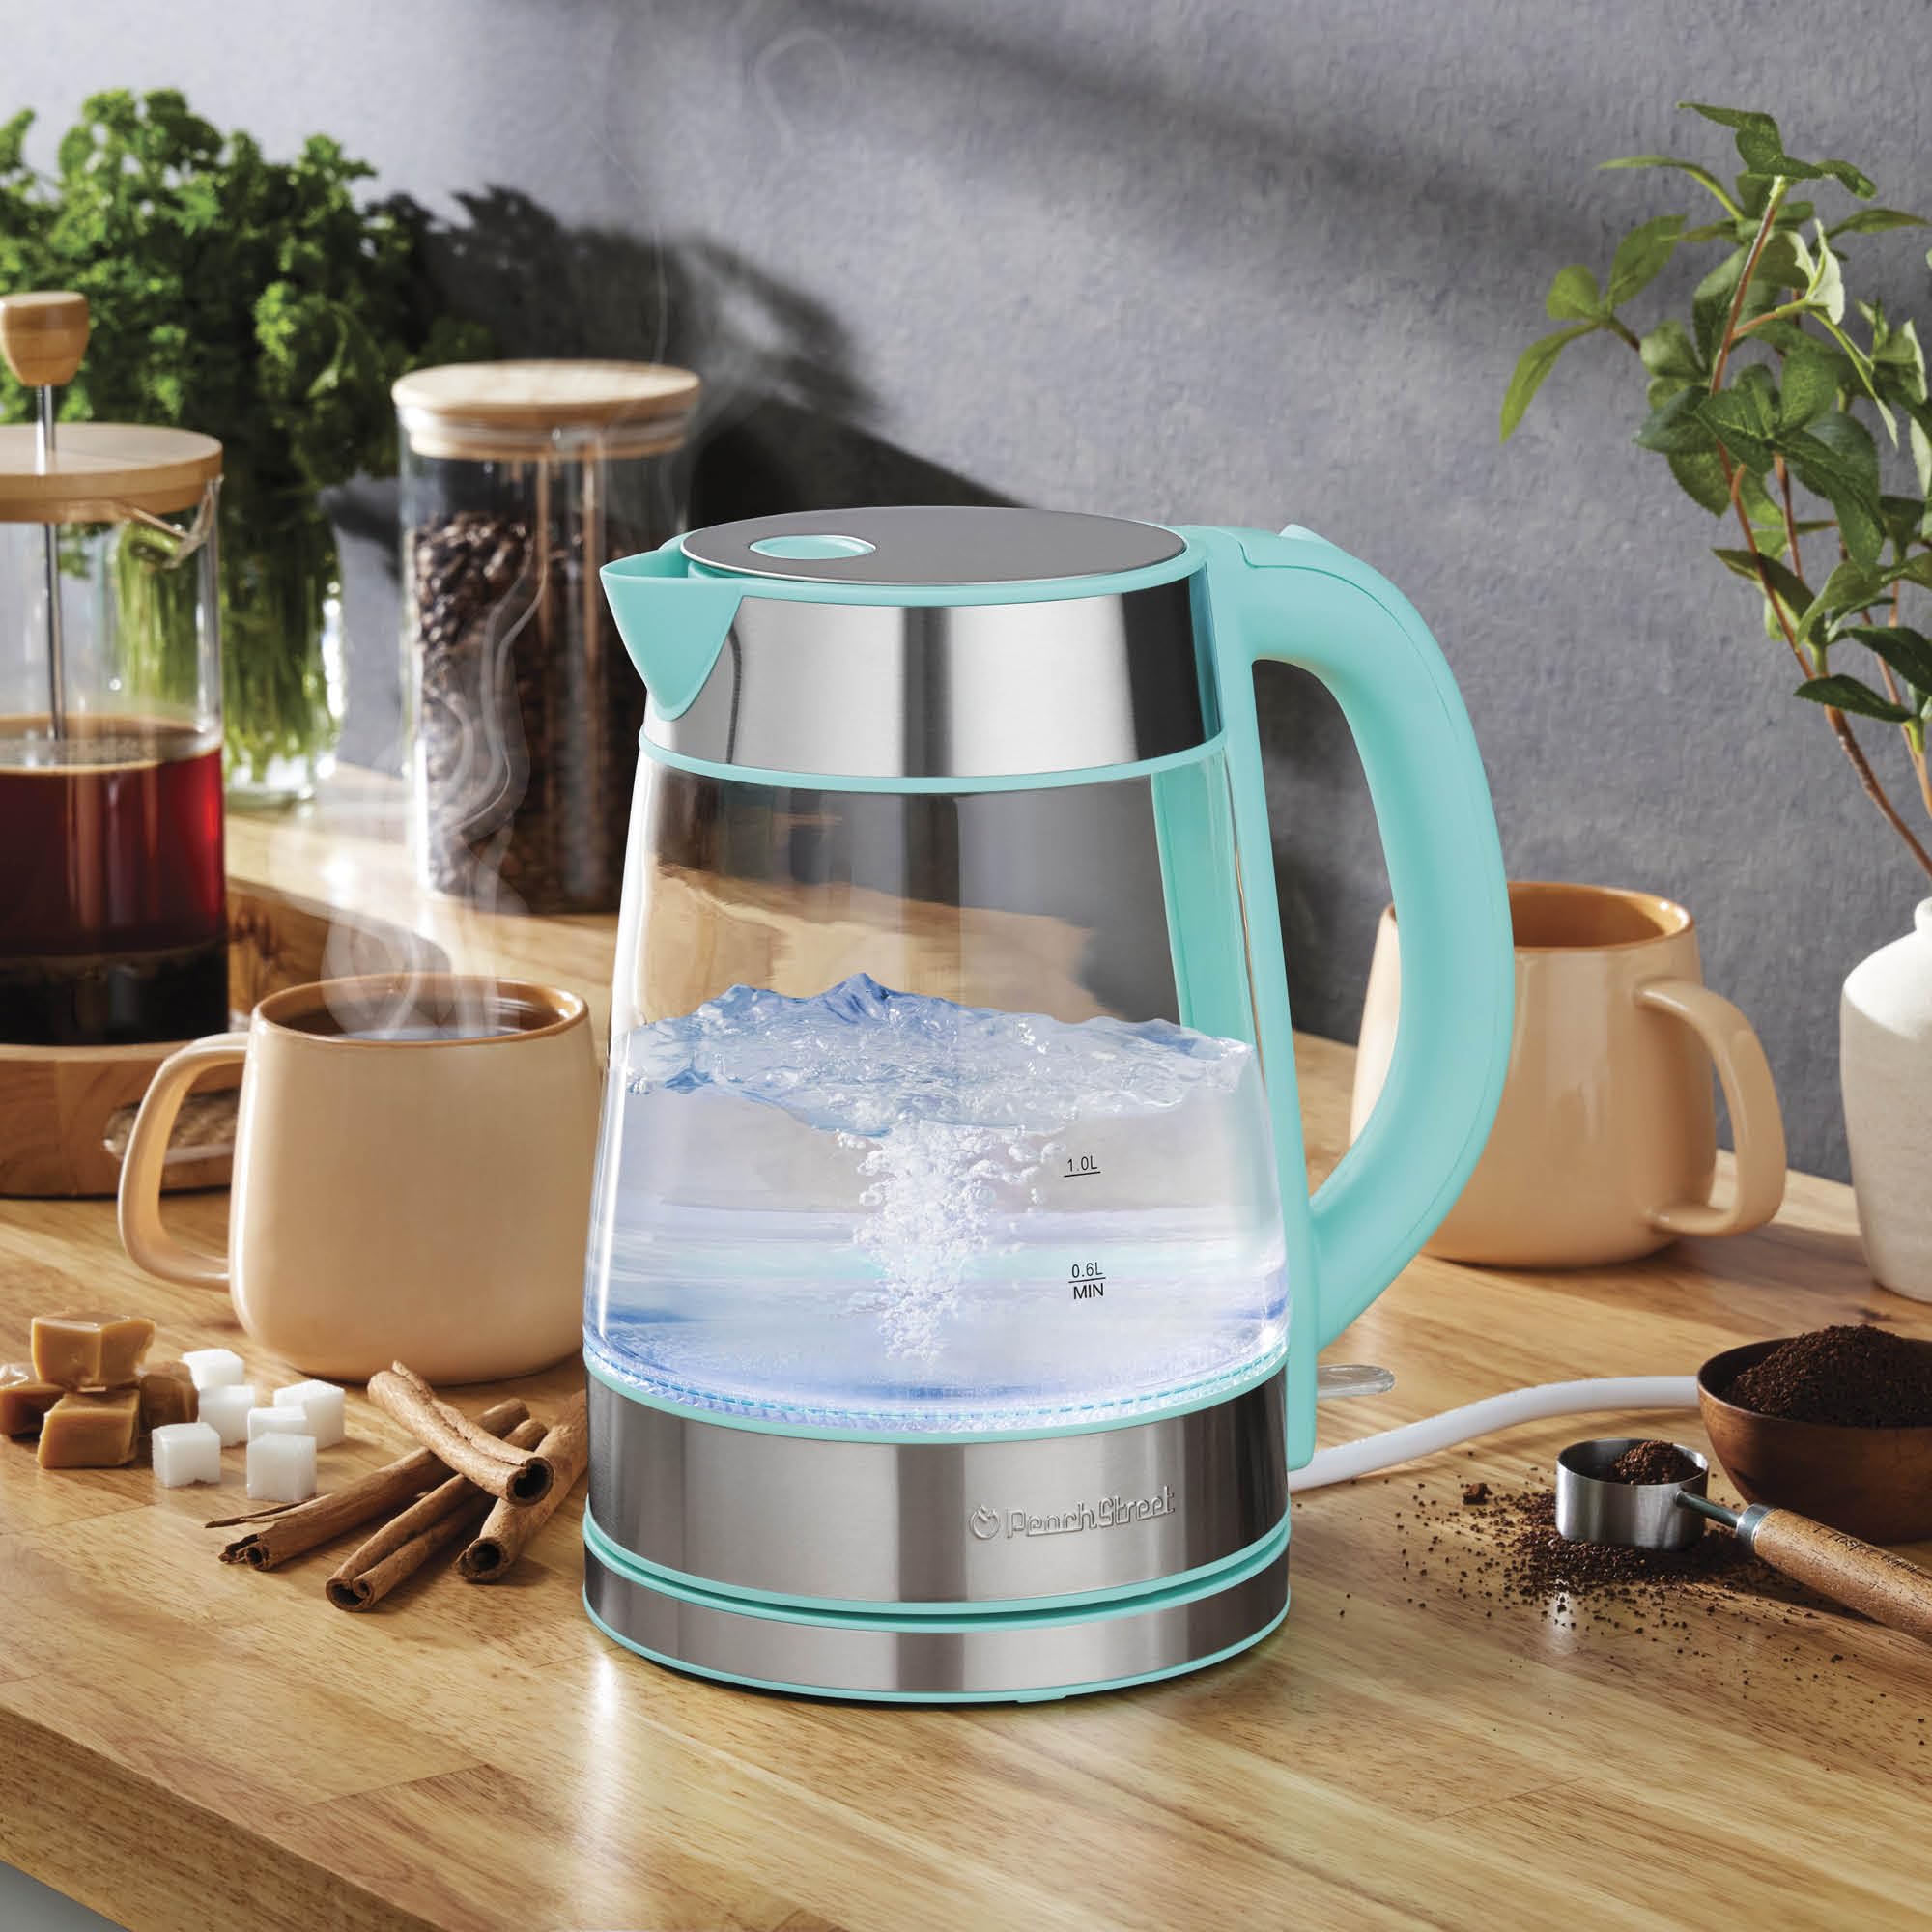 Speed-Boil Electric Kettle - 1.7L Water Boiler 1500W, Coffee & Tea Kettle Borosilicate Glass, Easy Clean Wide Opening, Auto Shut-Off, Cool Touch Handle, LED Light. 360° Rotation  - Like New